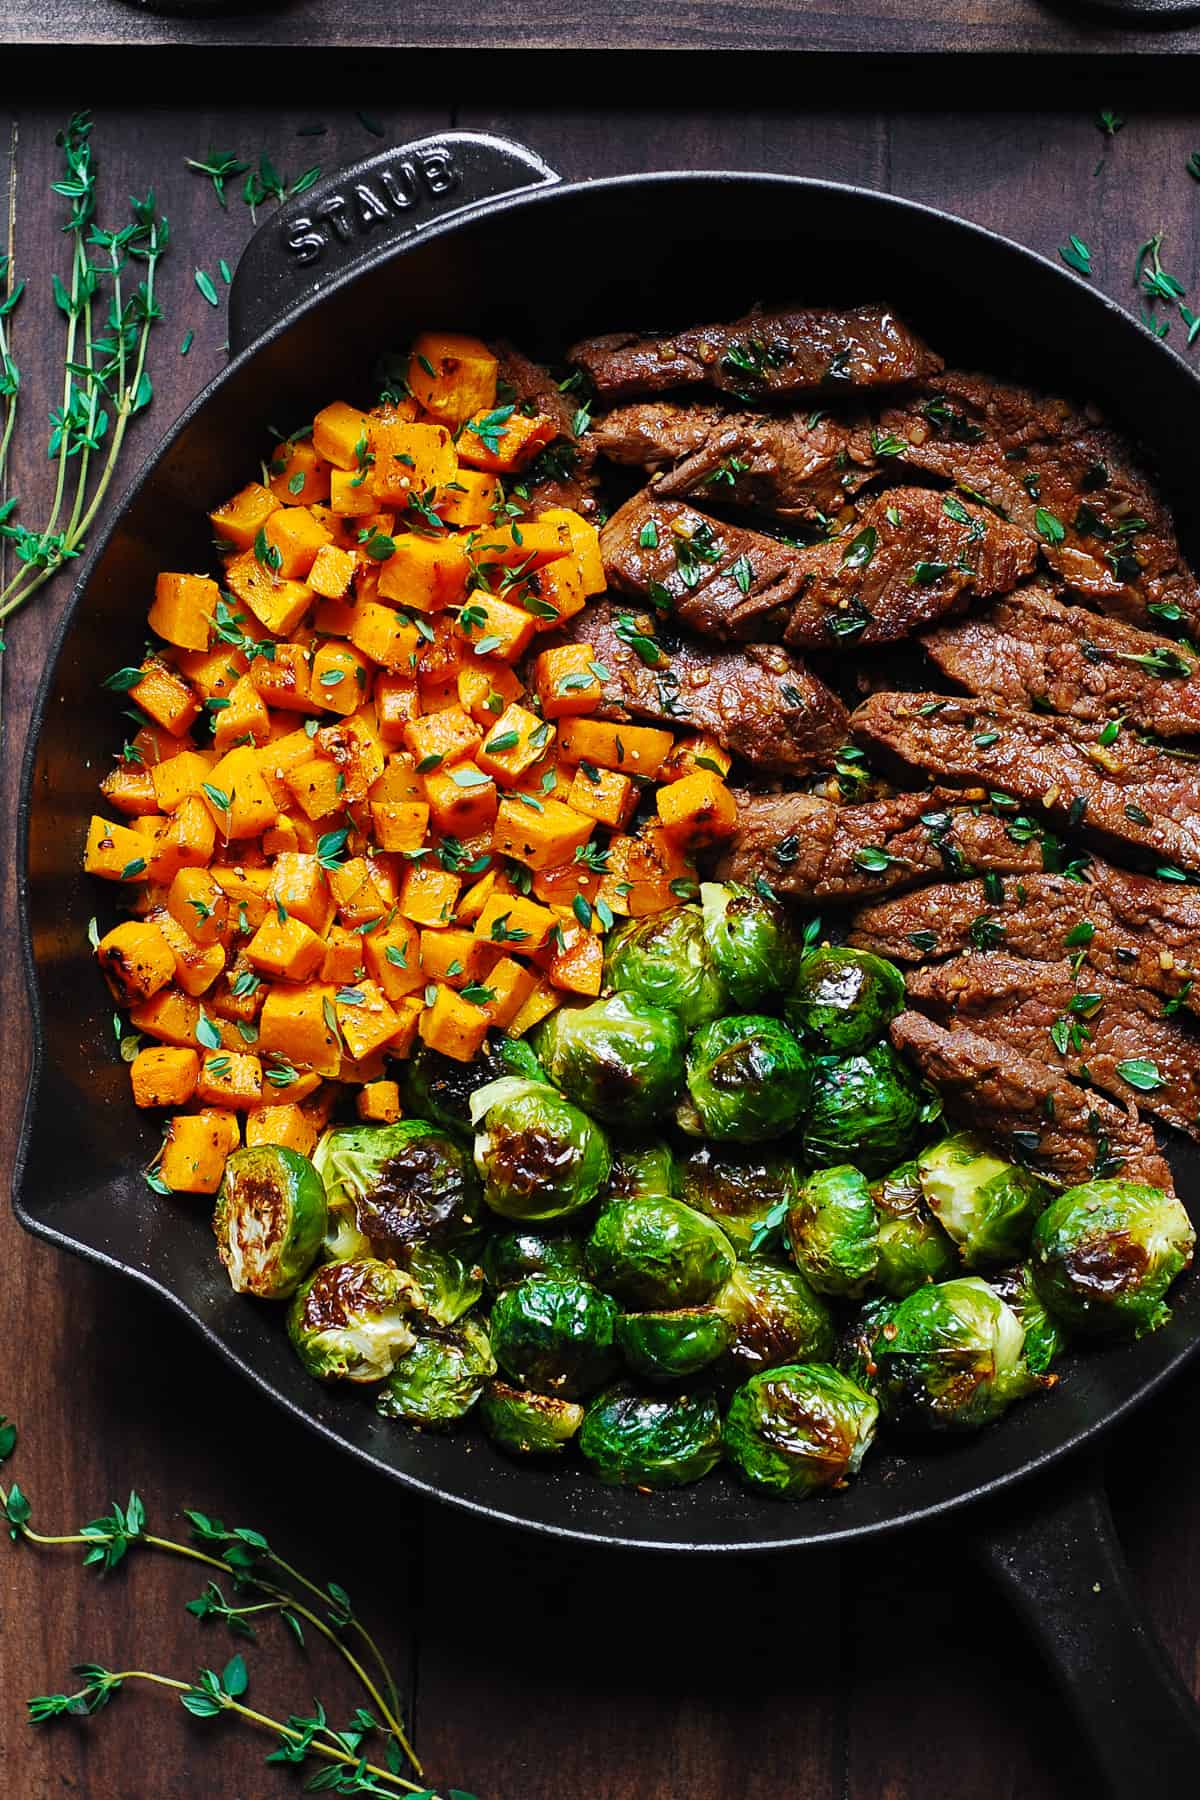 Garlic Butter Steak with Brussels Sprouts and Butternut Squash in a cast-iron skillet